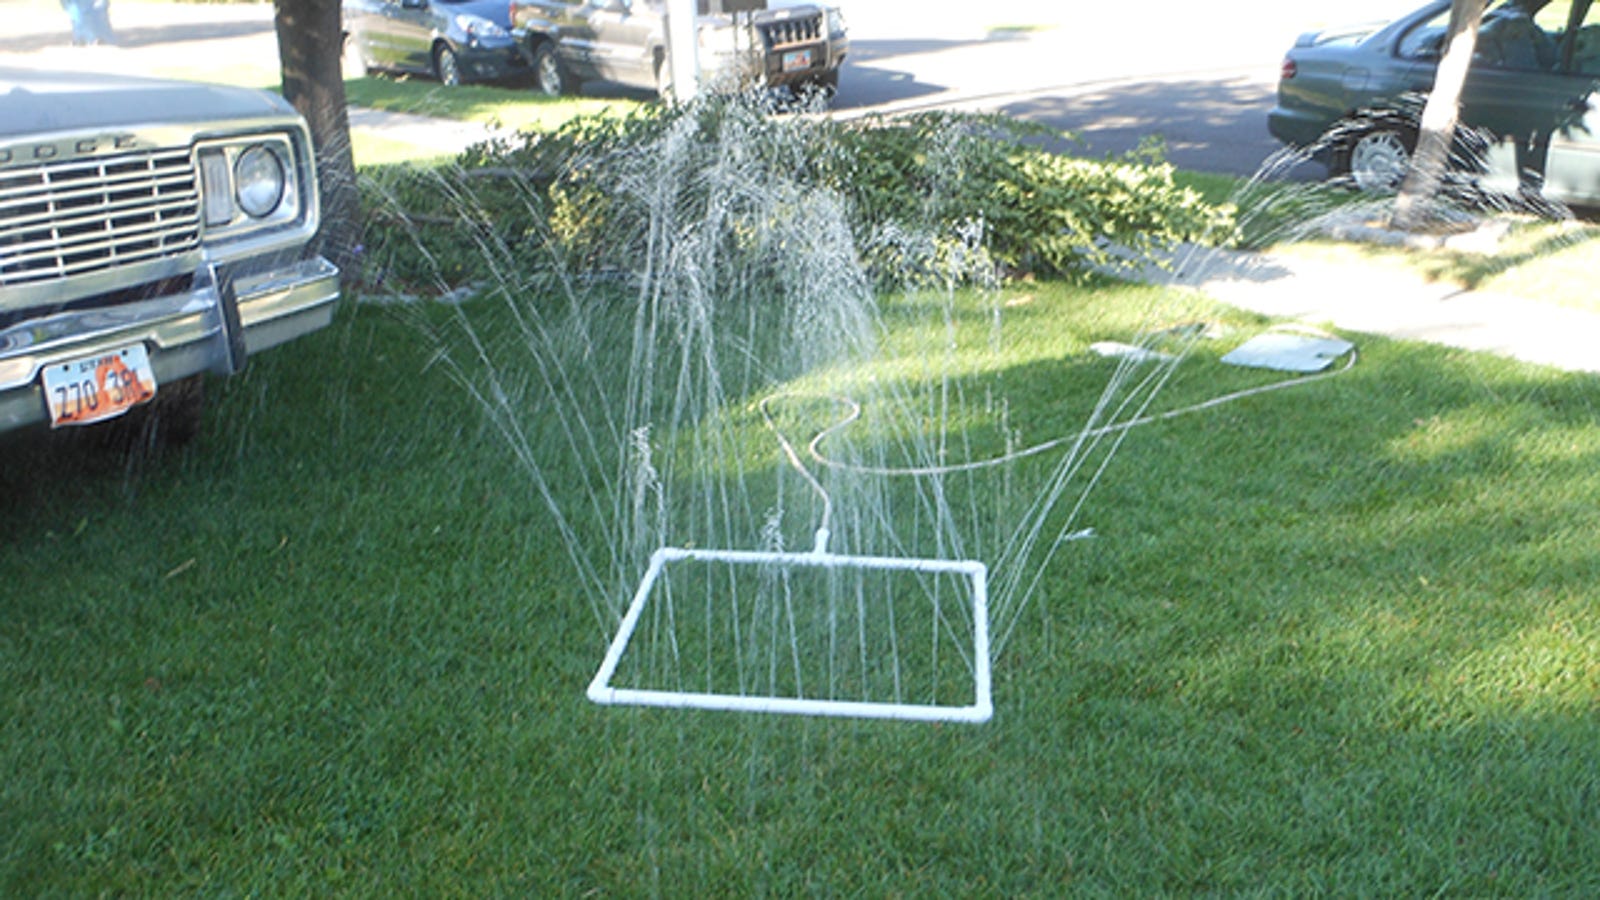 DIY PVC Sprinkler Is Dirt Cheap, Fits Lawns of All Shapes and Sizes How To Make A Boom Sprayer Out Of Pvc Pipe